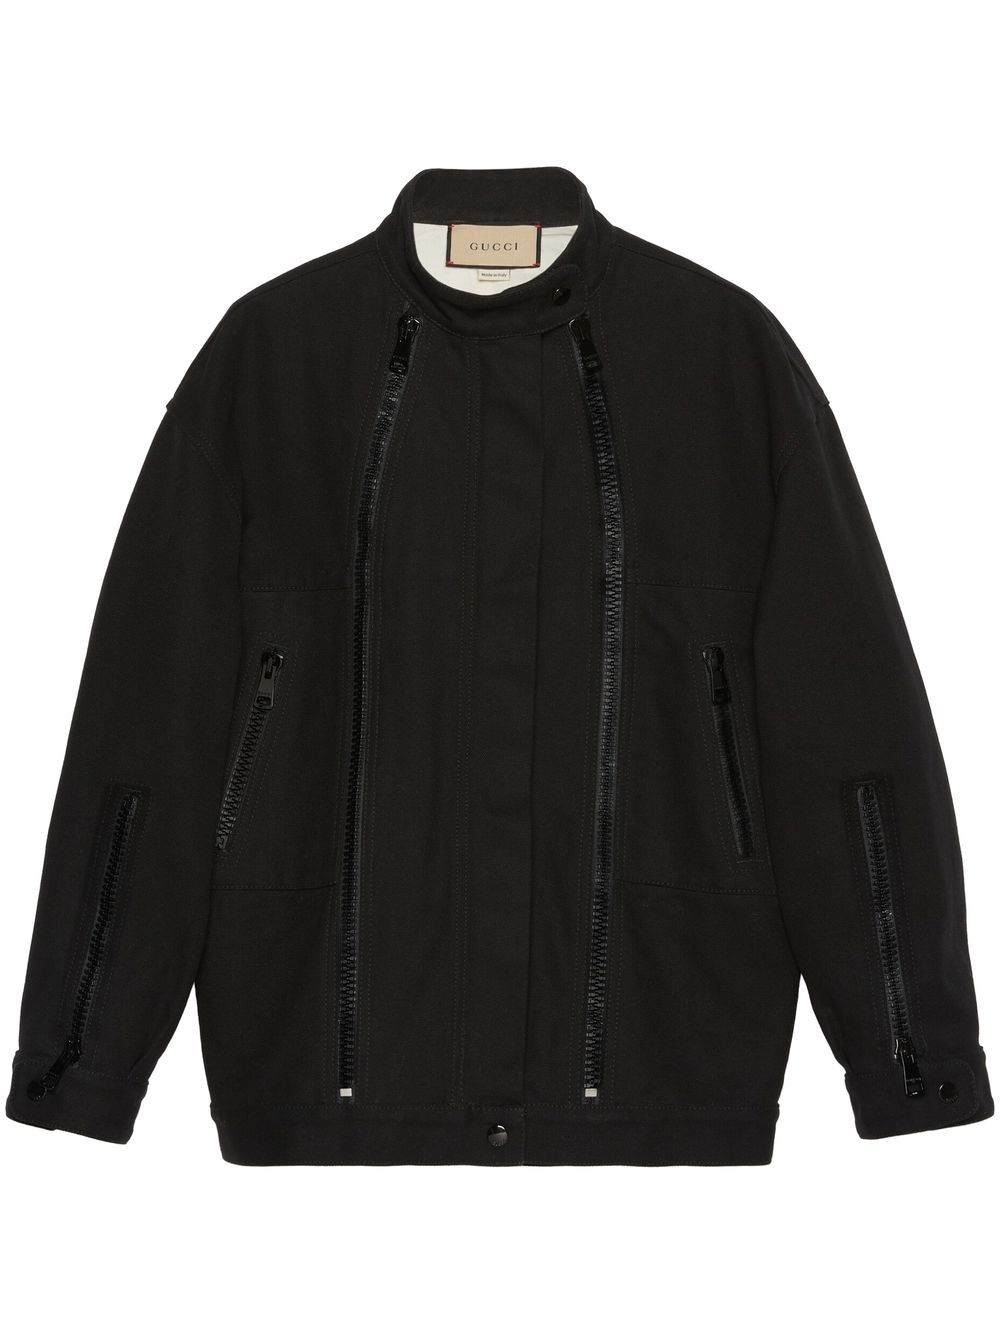 Gucci Gg Canvas Bomber Jacket In Black